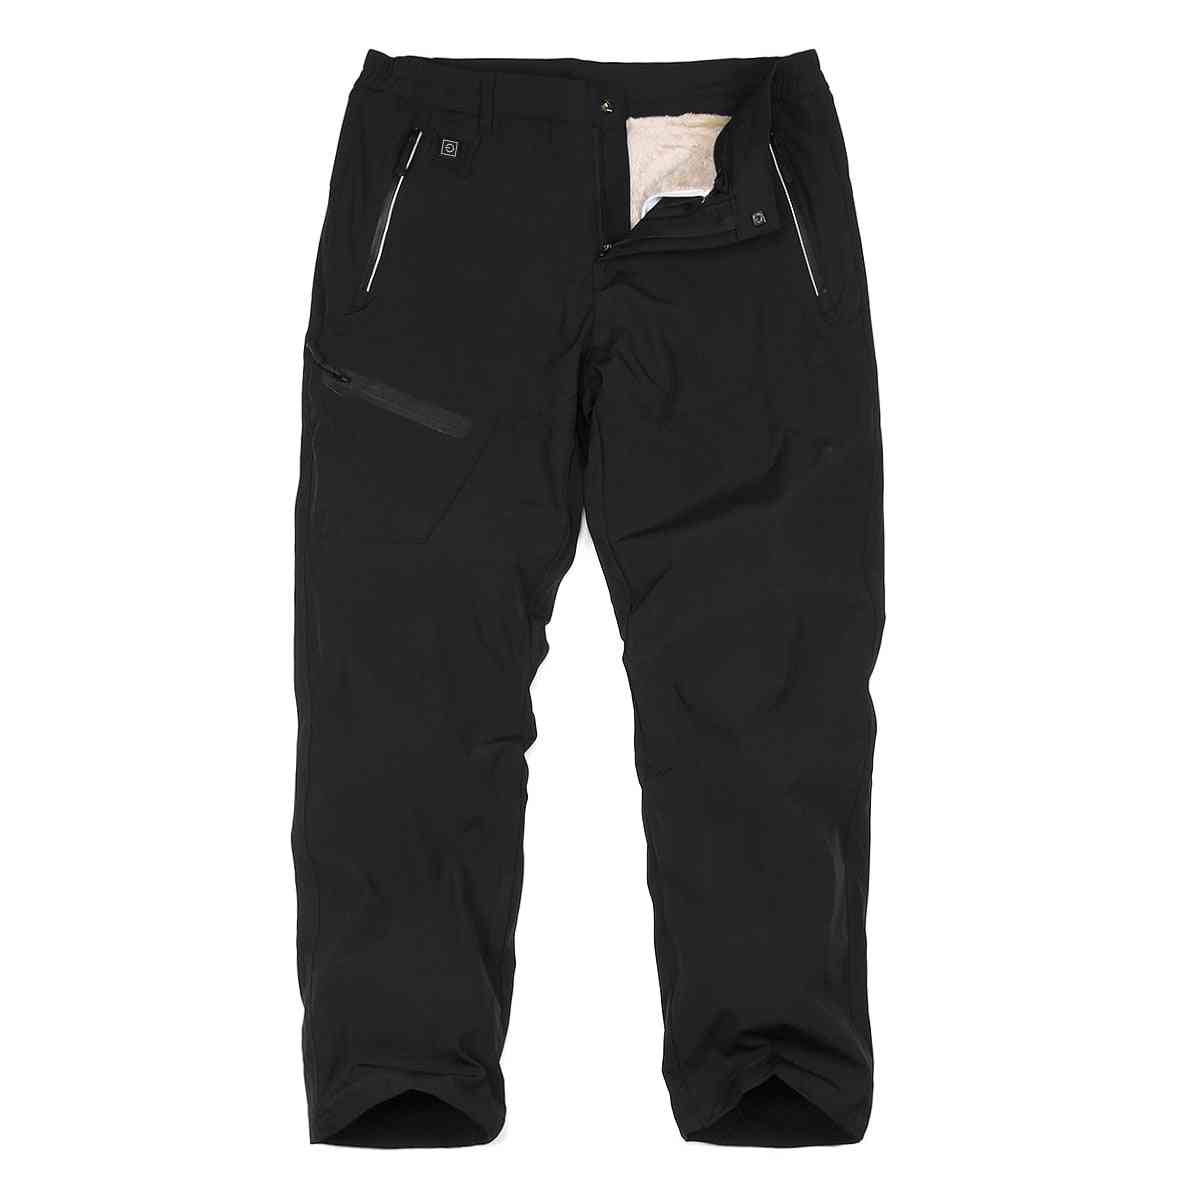 Men Women Usb Electric Heating Winter Intelligent Warm Trousers Pant For Outdoor Sport